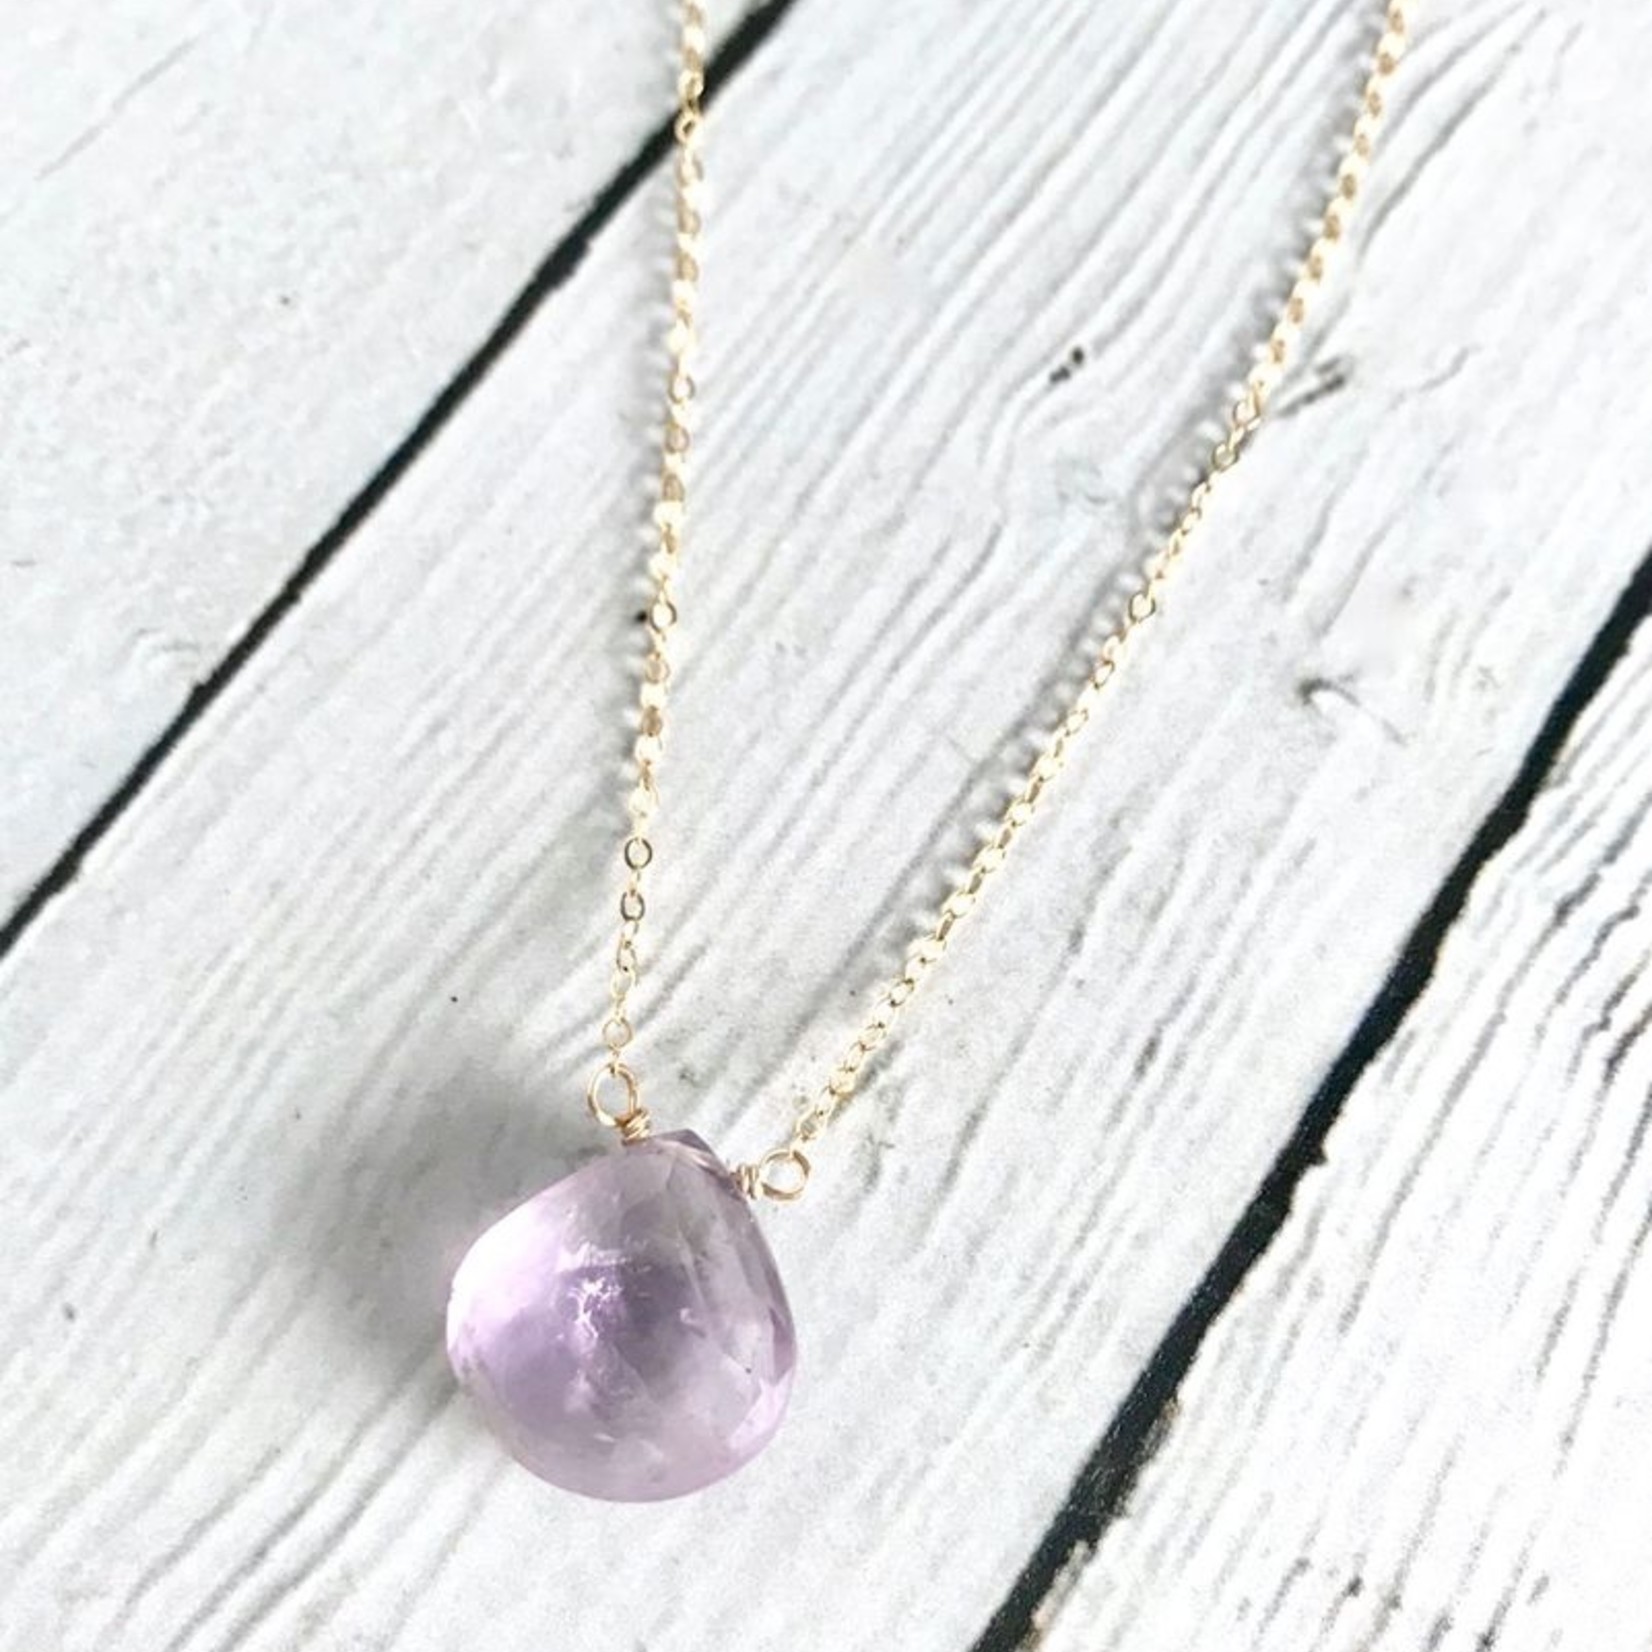 Handmade 14k Goldfill Necklace with Large Amethyst Drop